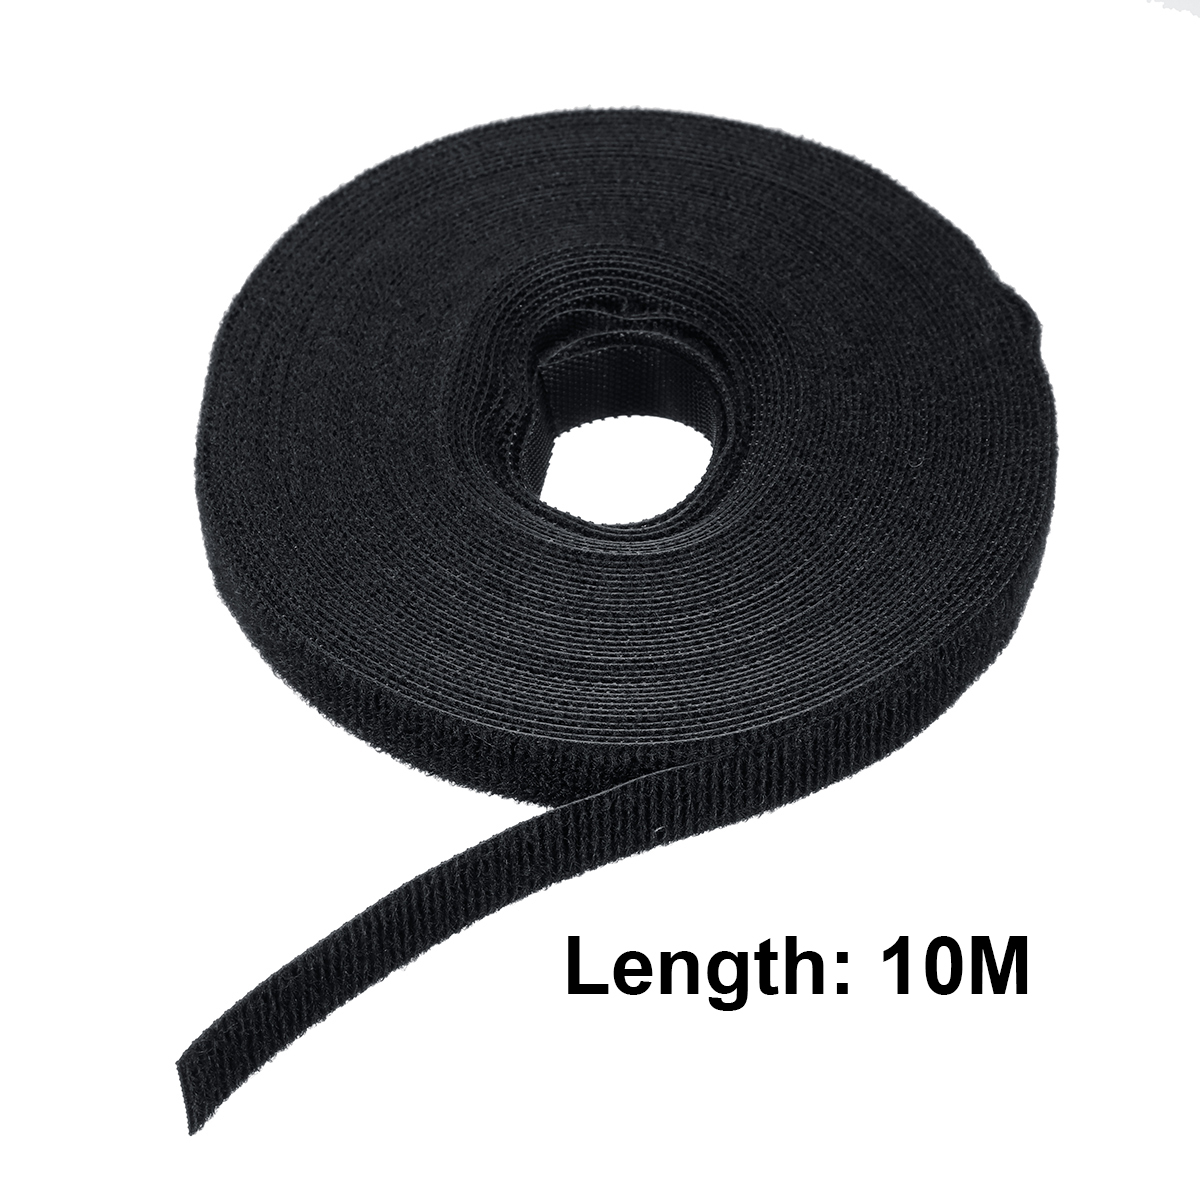 10m-Nylon-Cable-Ties-Wrap-Ties-Fastening-Cables-Wire-Cable-Line-Holder-Winder-Clip-1558531-6